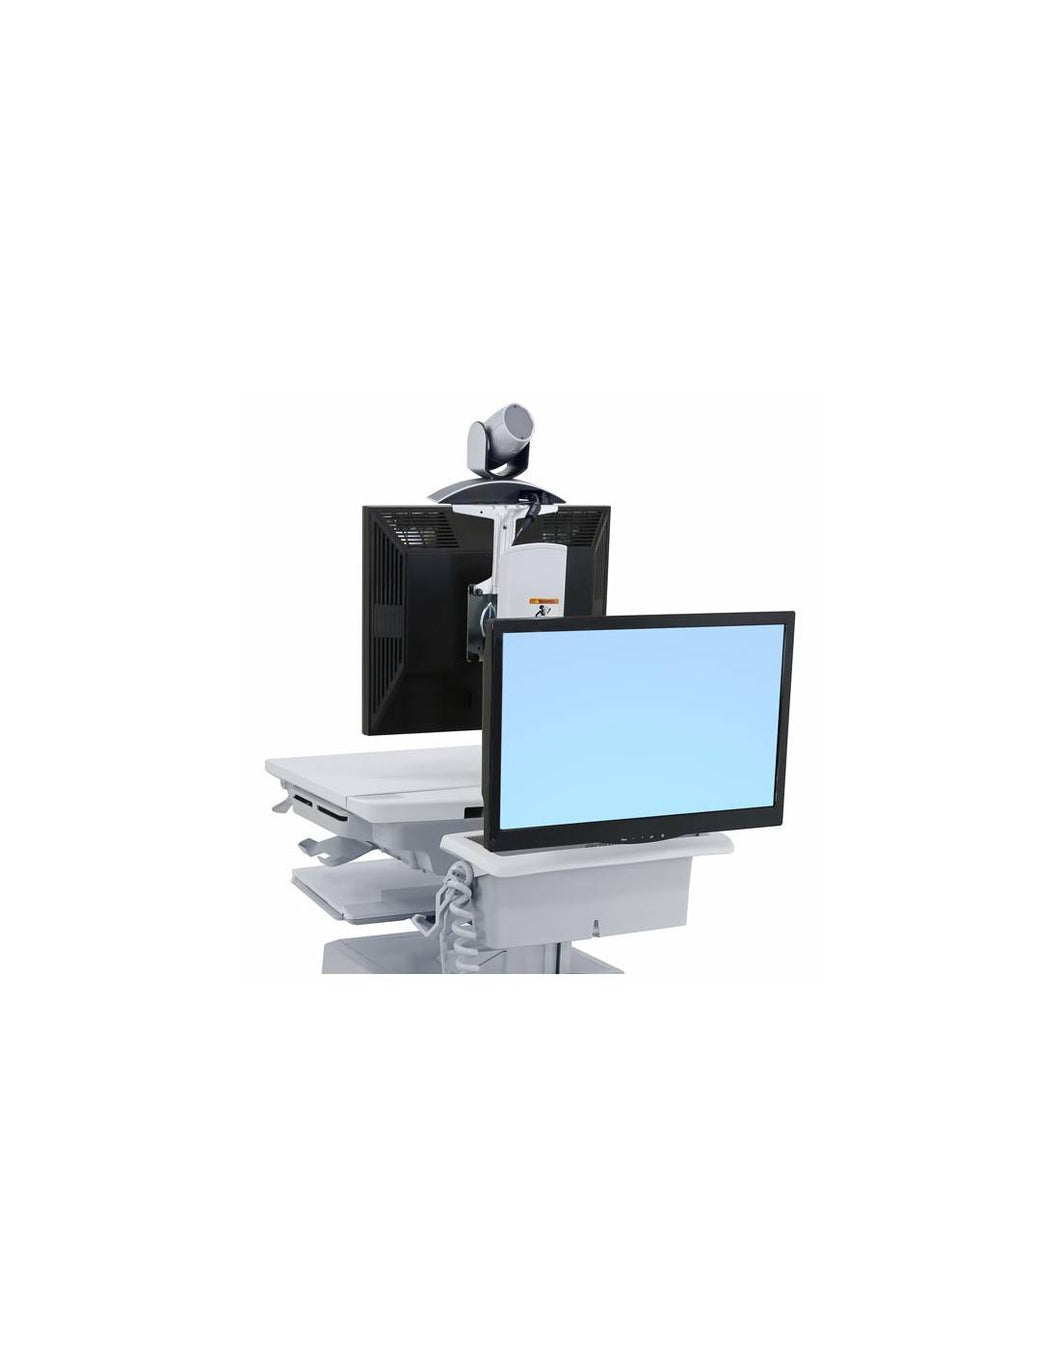 ERGOTRON TELEPRESENCE KIT,BACK-TO-BACK,FOR STYLEVIEW43/44 CARTS.CONVERTS A CART